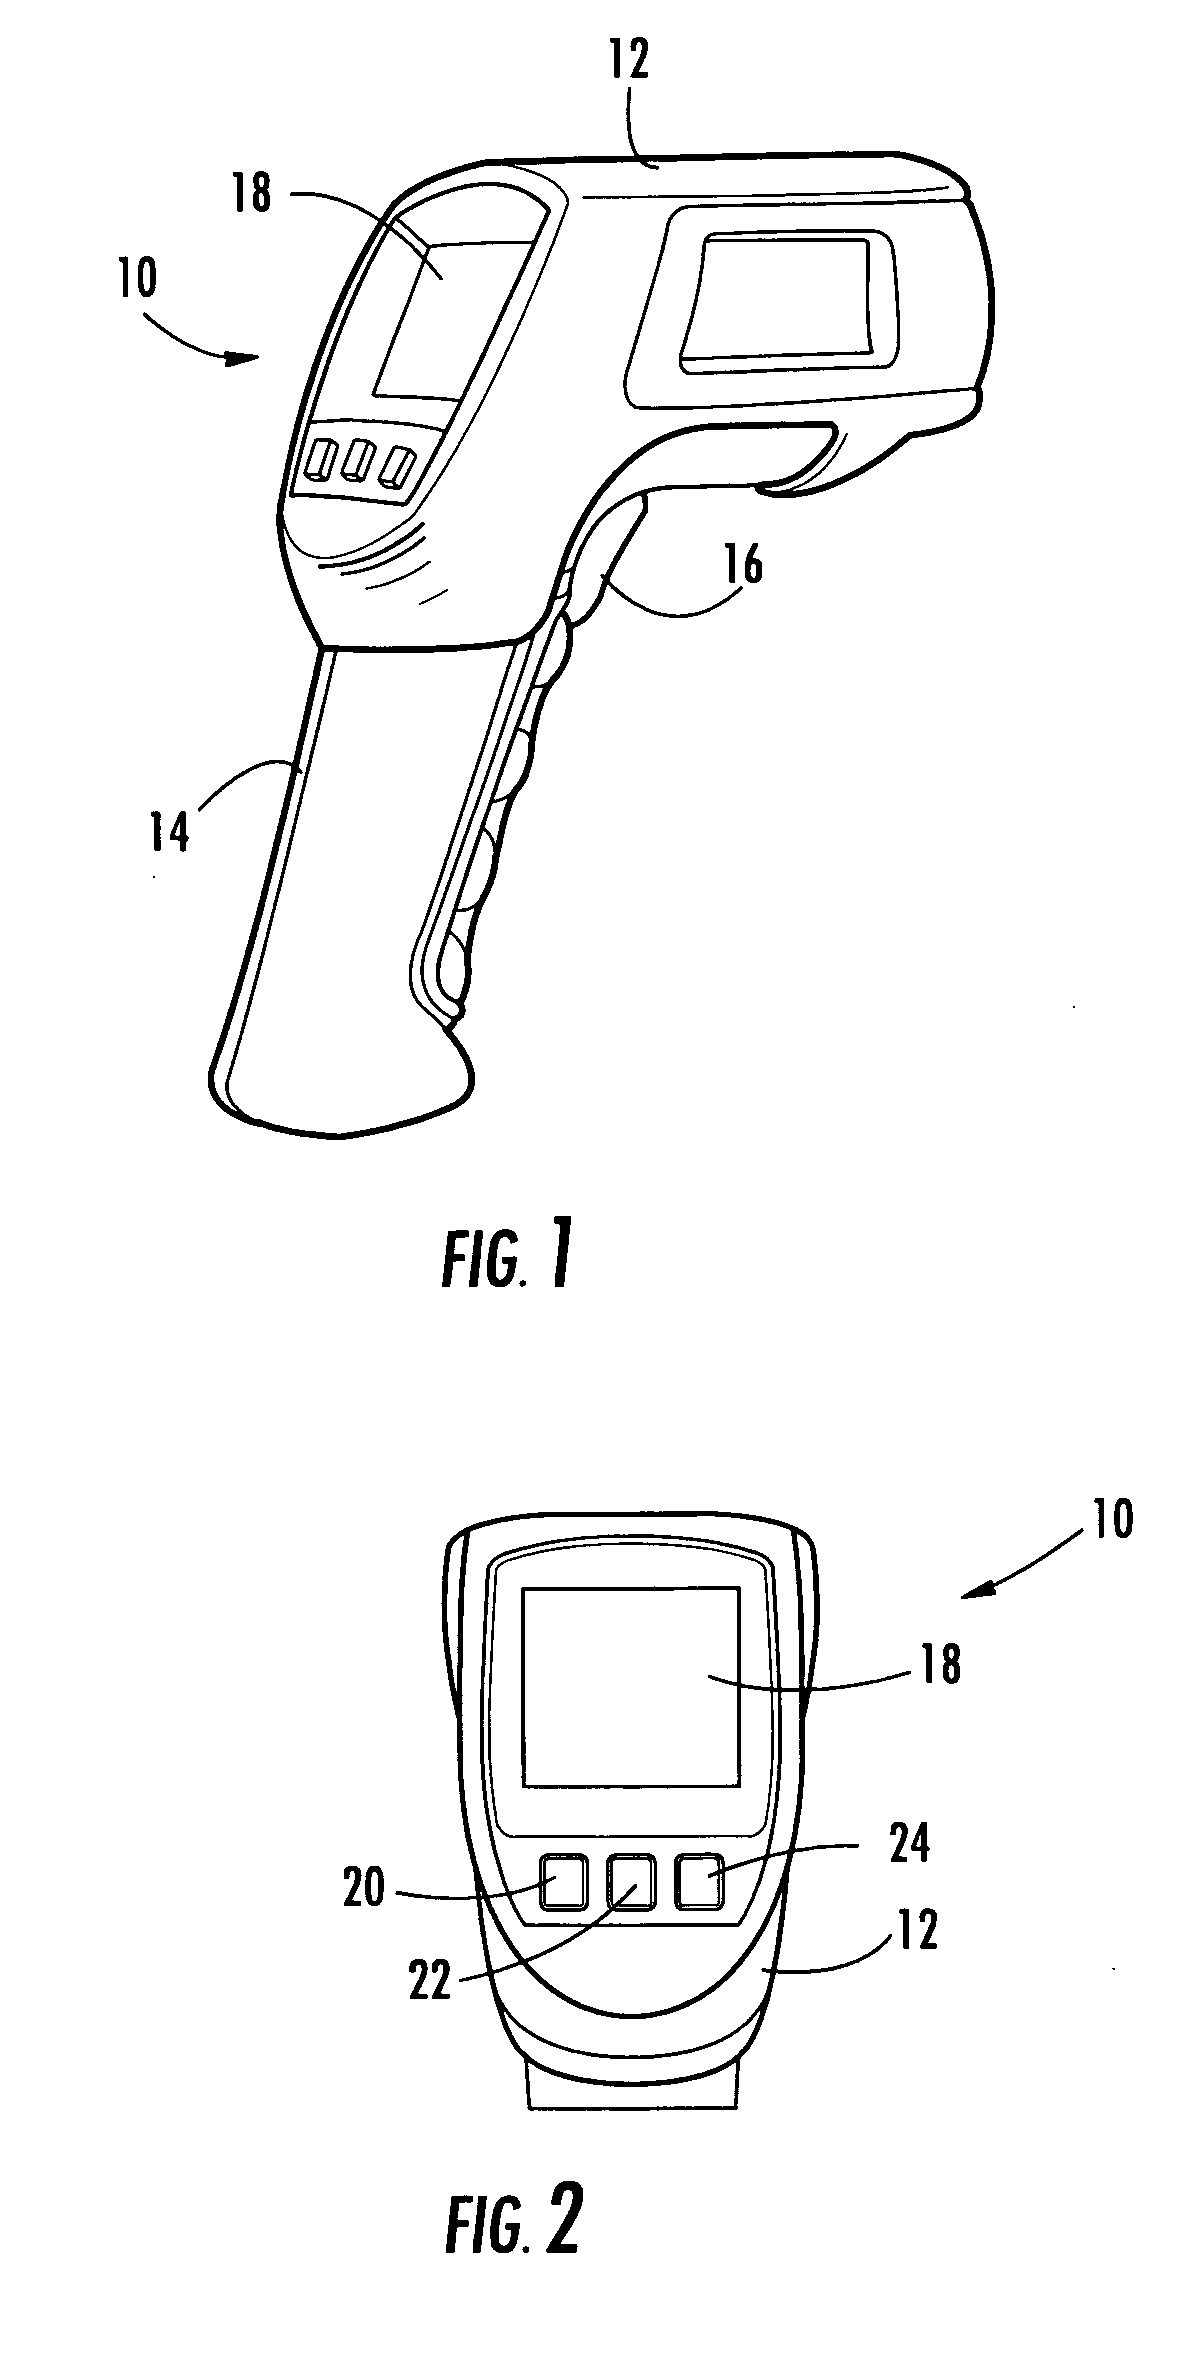 Portable IR Thermometer Having Graphical User Display and Interface